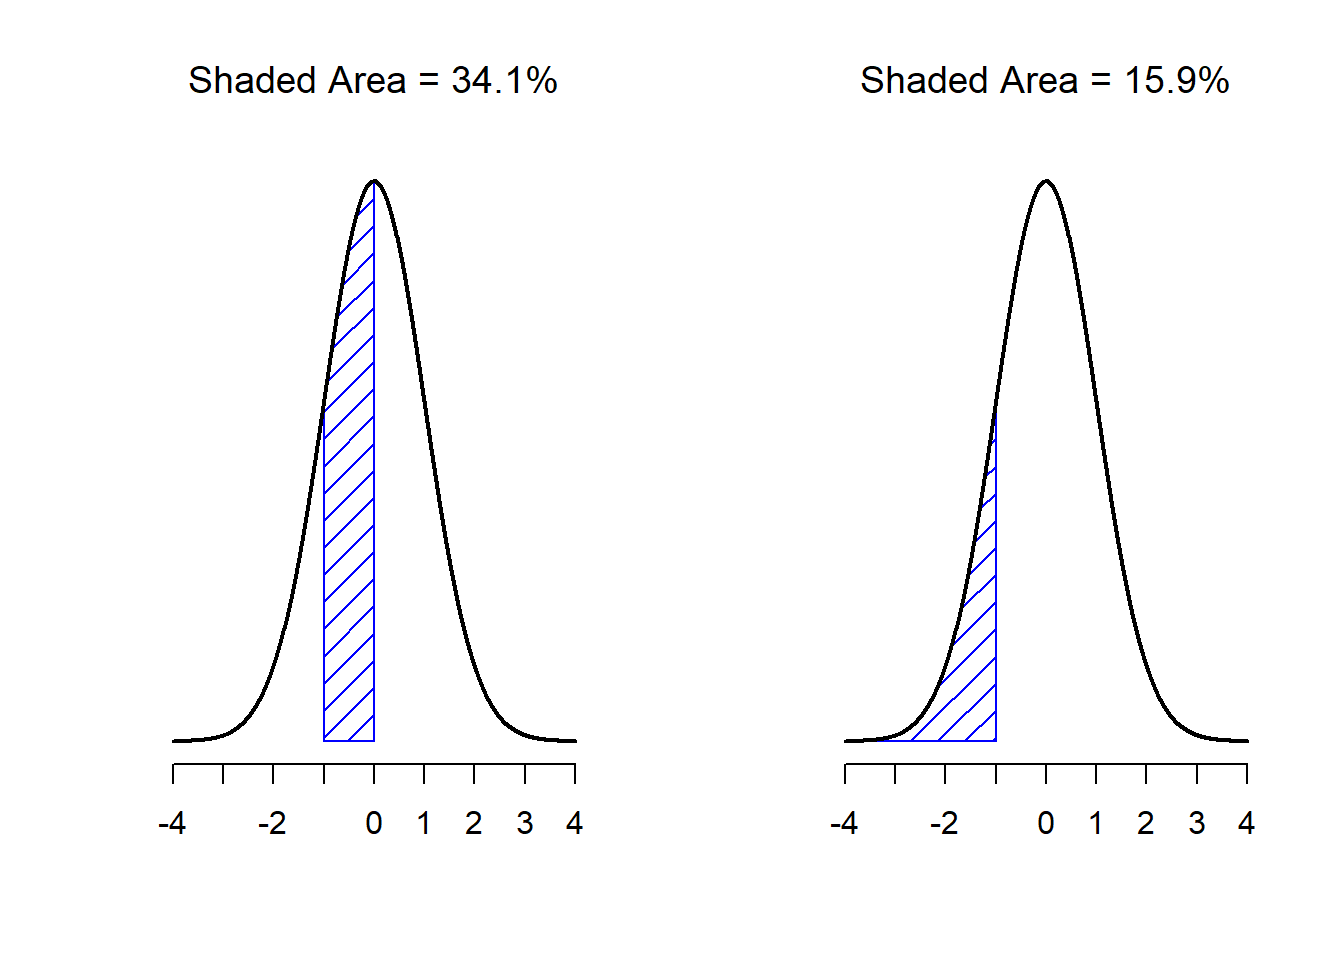 Two more examples of the "area under the curve idea". There is a 15.9% chance that an observation is one standard deviation below the mean or smaller (left), and a 34.1% chance that the observation is greater than one standard deviation below the mean but still below the mean (right). Notice that if you add these two numbers together you get 15.9% + 34.1% = 50%. For normally distributed data, there is a 50% chance that an observation falls below the mean. And of course that also implies that there is a 50% chance that it falls above the mean.